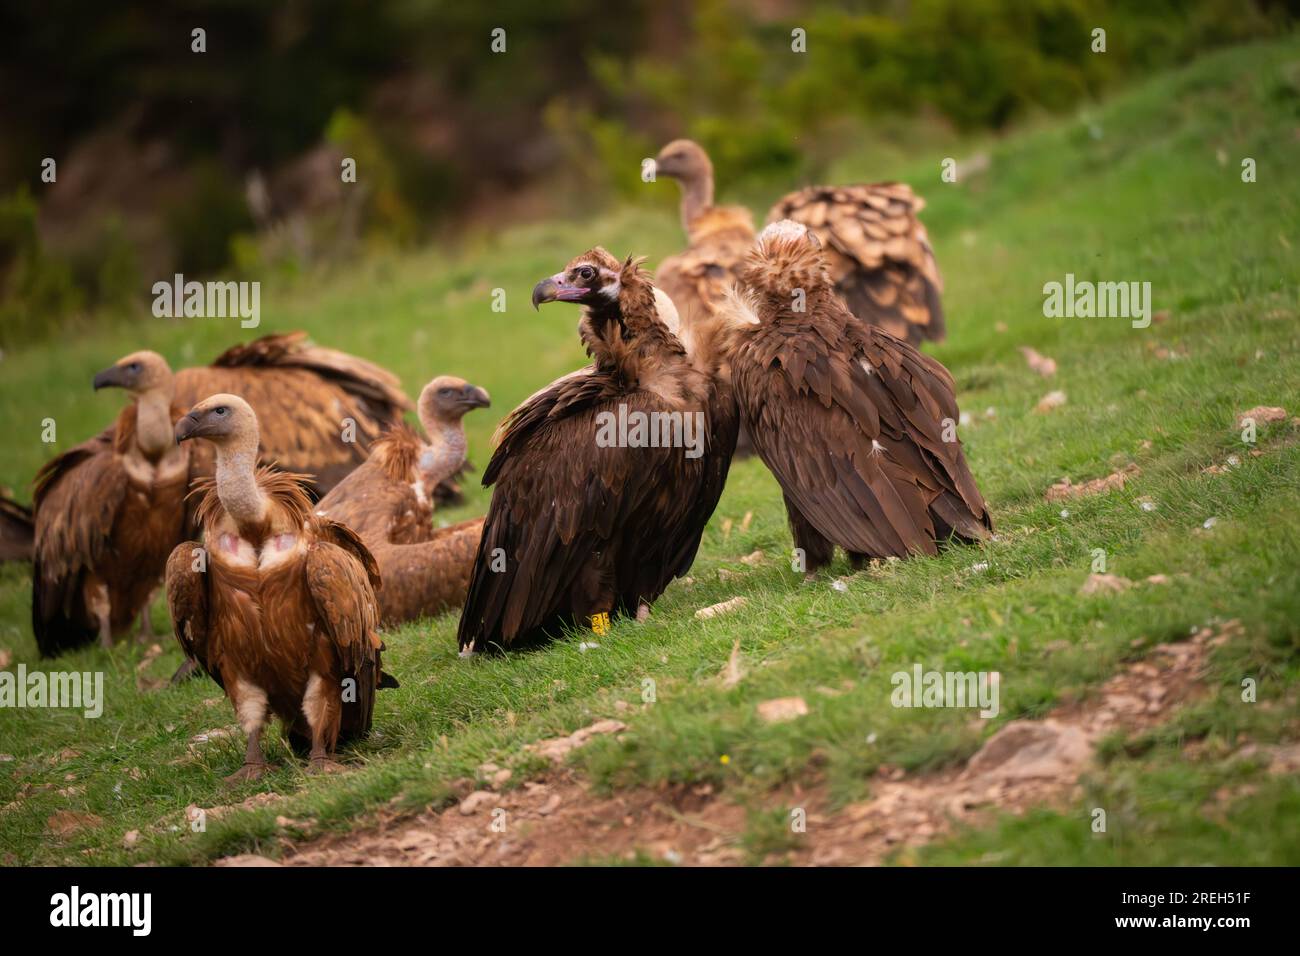 The cinereous vulture (Aegypius monachus) AKA Eurasian black vulture one of the worlds' largest flying birds, contending for the title with the Andean Stock Photo